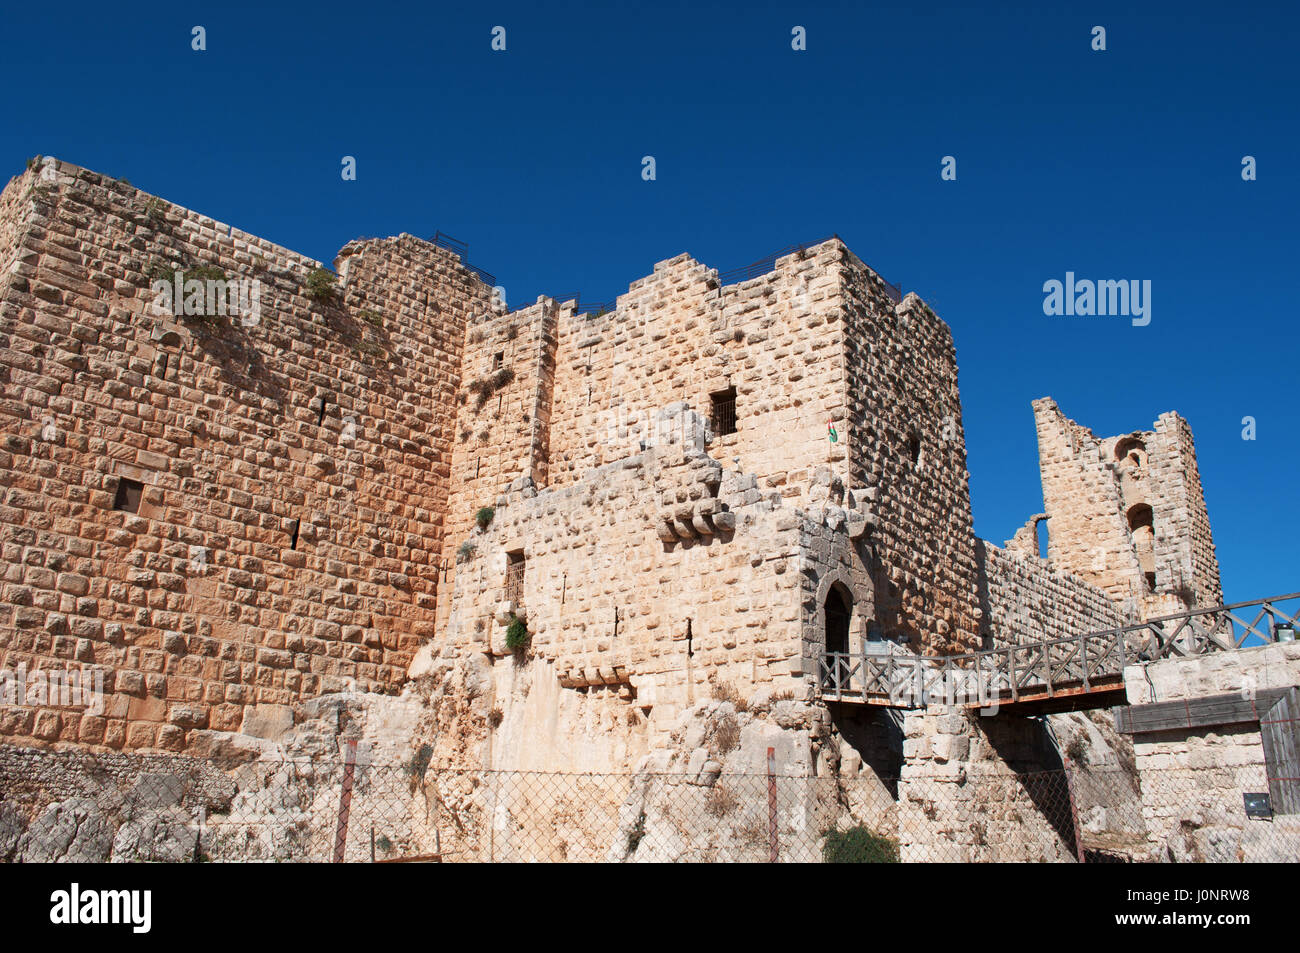 Jordan, Middle East: view of the Ajloun Castle, Muslim castle built on a hilltop by the Ayyubids in the 12th century, enlarged by the Mamluks Stock Photo